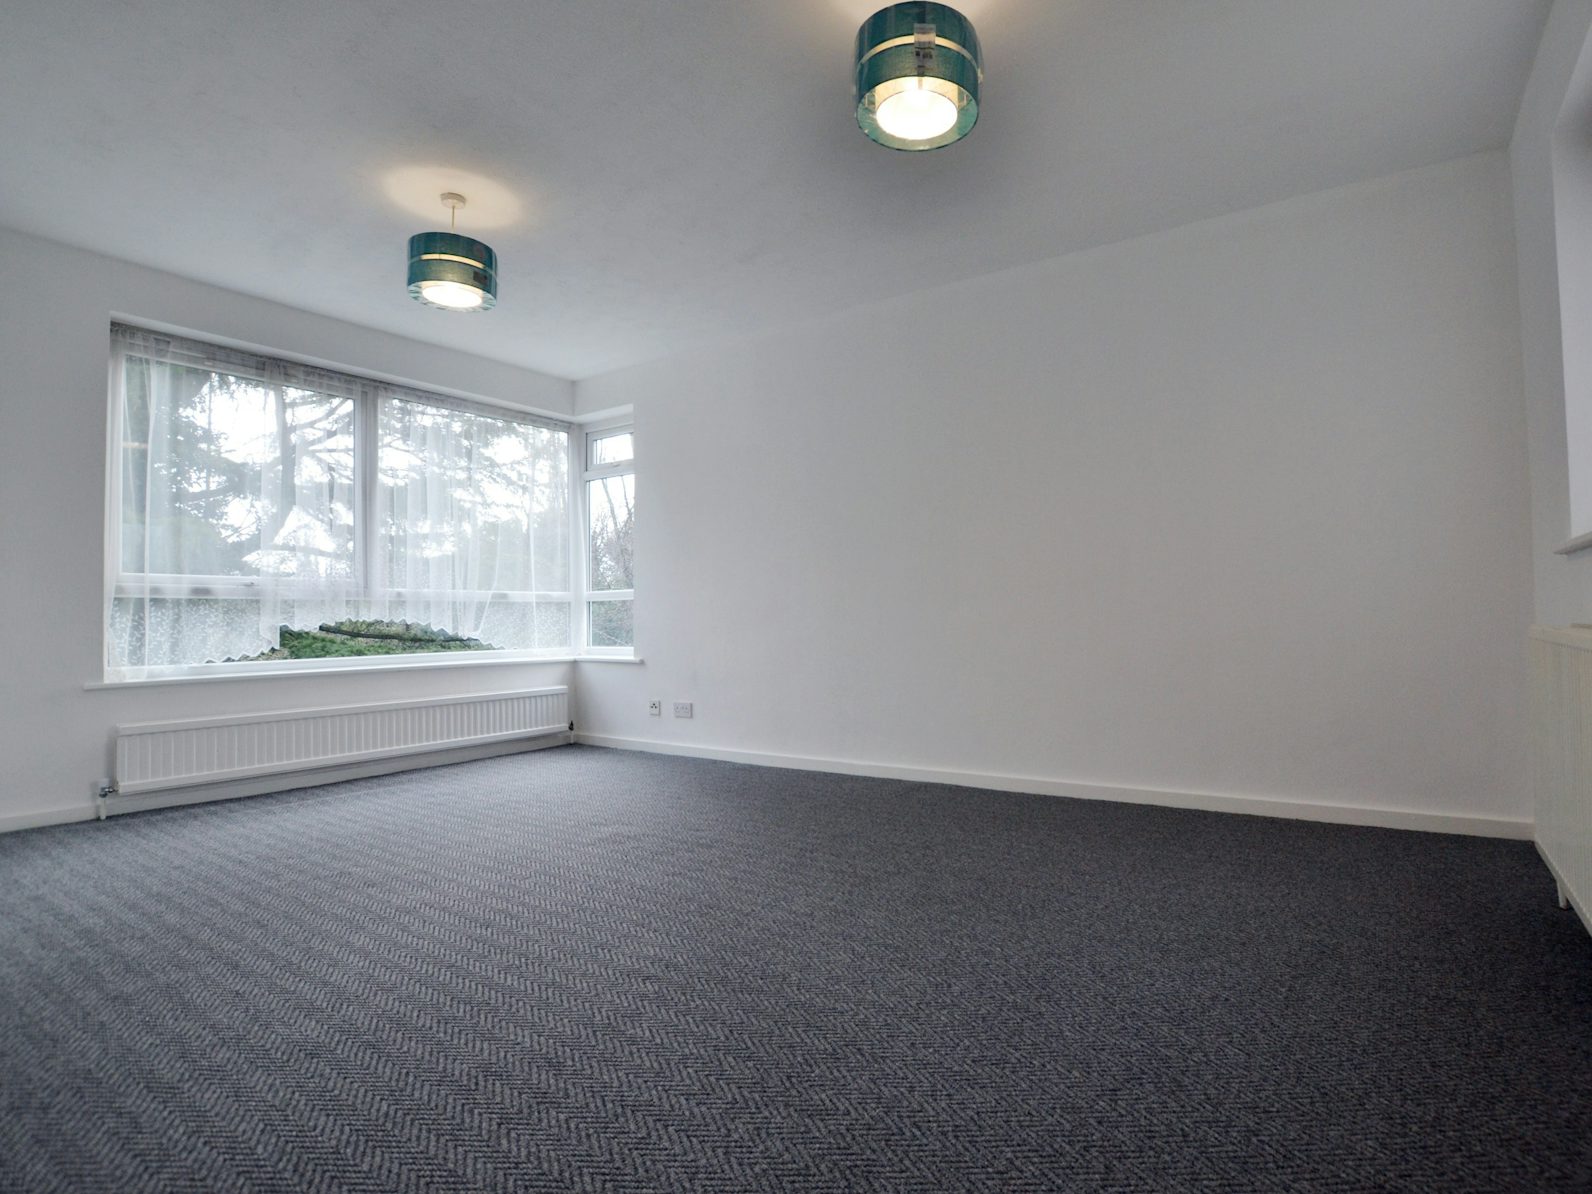 Flat to rent on 72 Cleanthus Road Shooters Hill, London, SE18